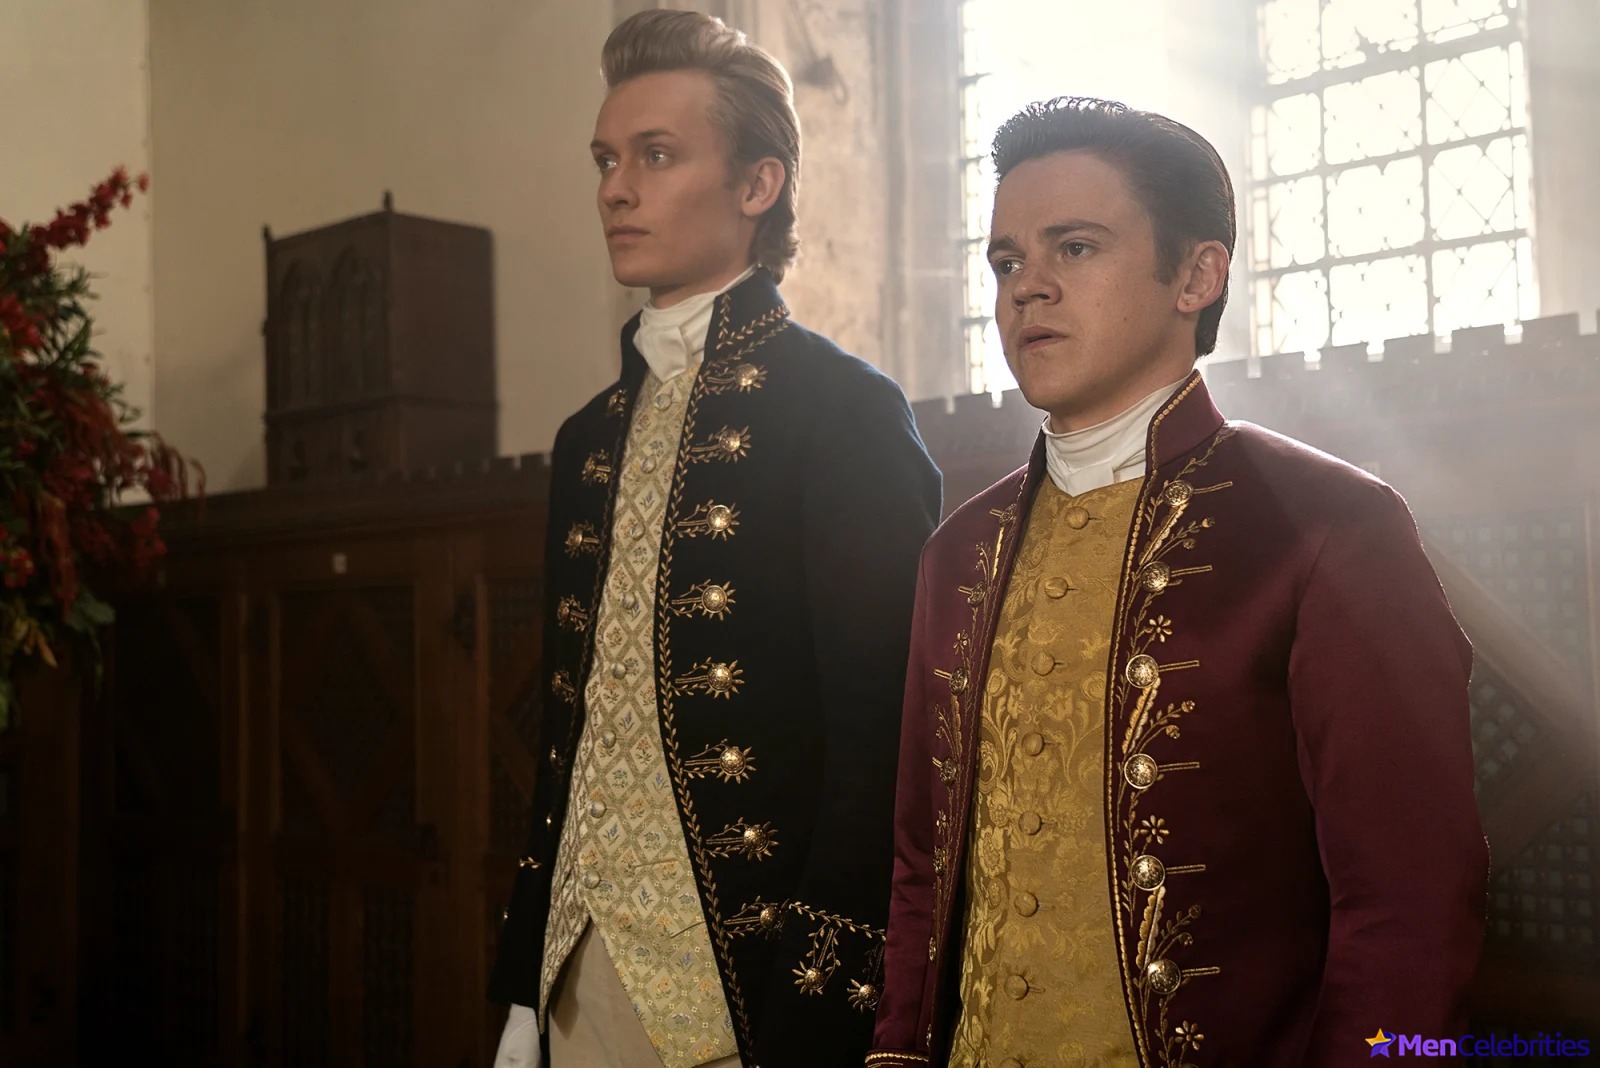 New gay couple in ‘Queen Charlotte’